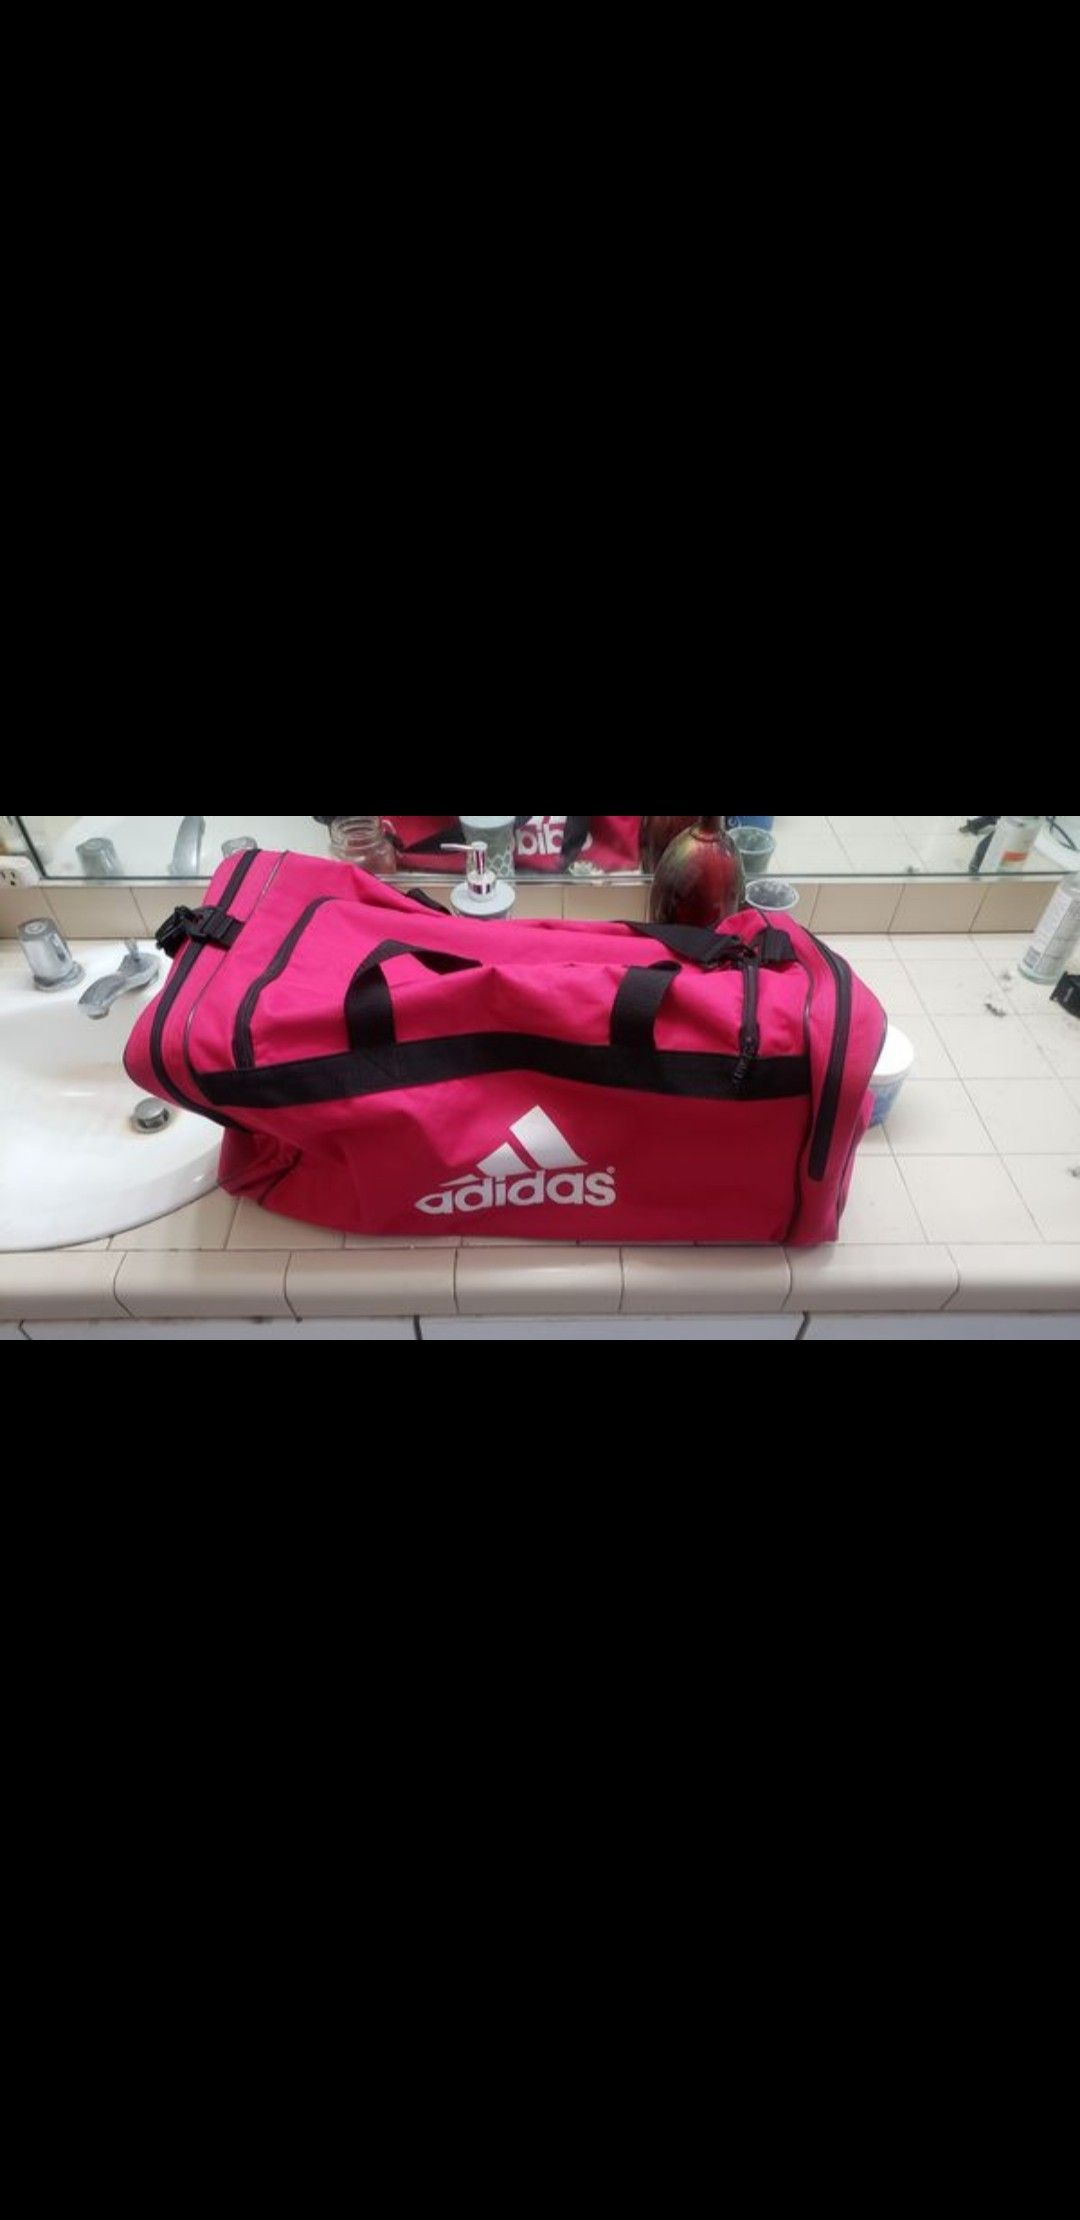 Adidas duffle sports bag with major league soccer patch